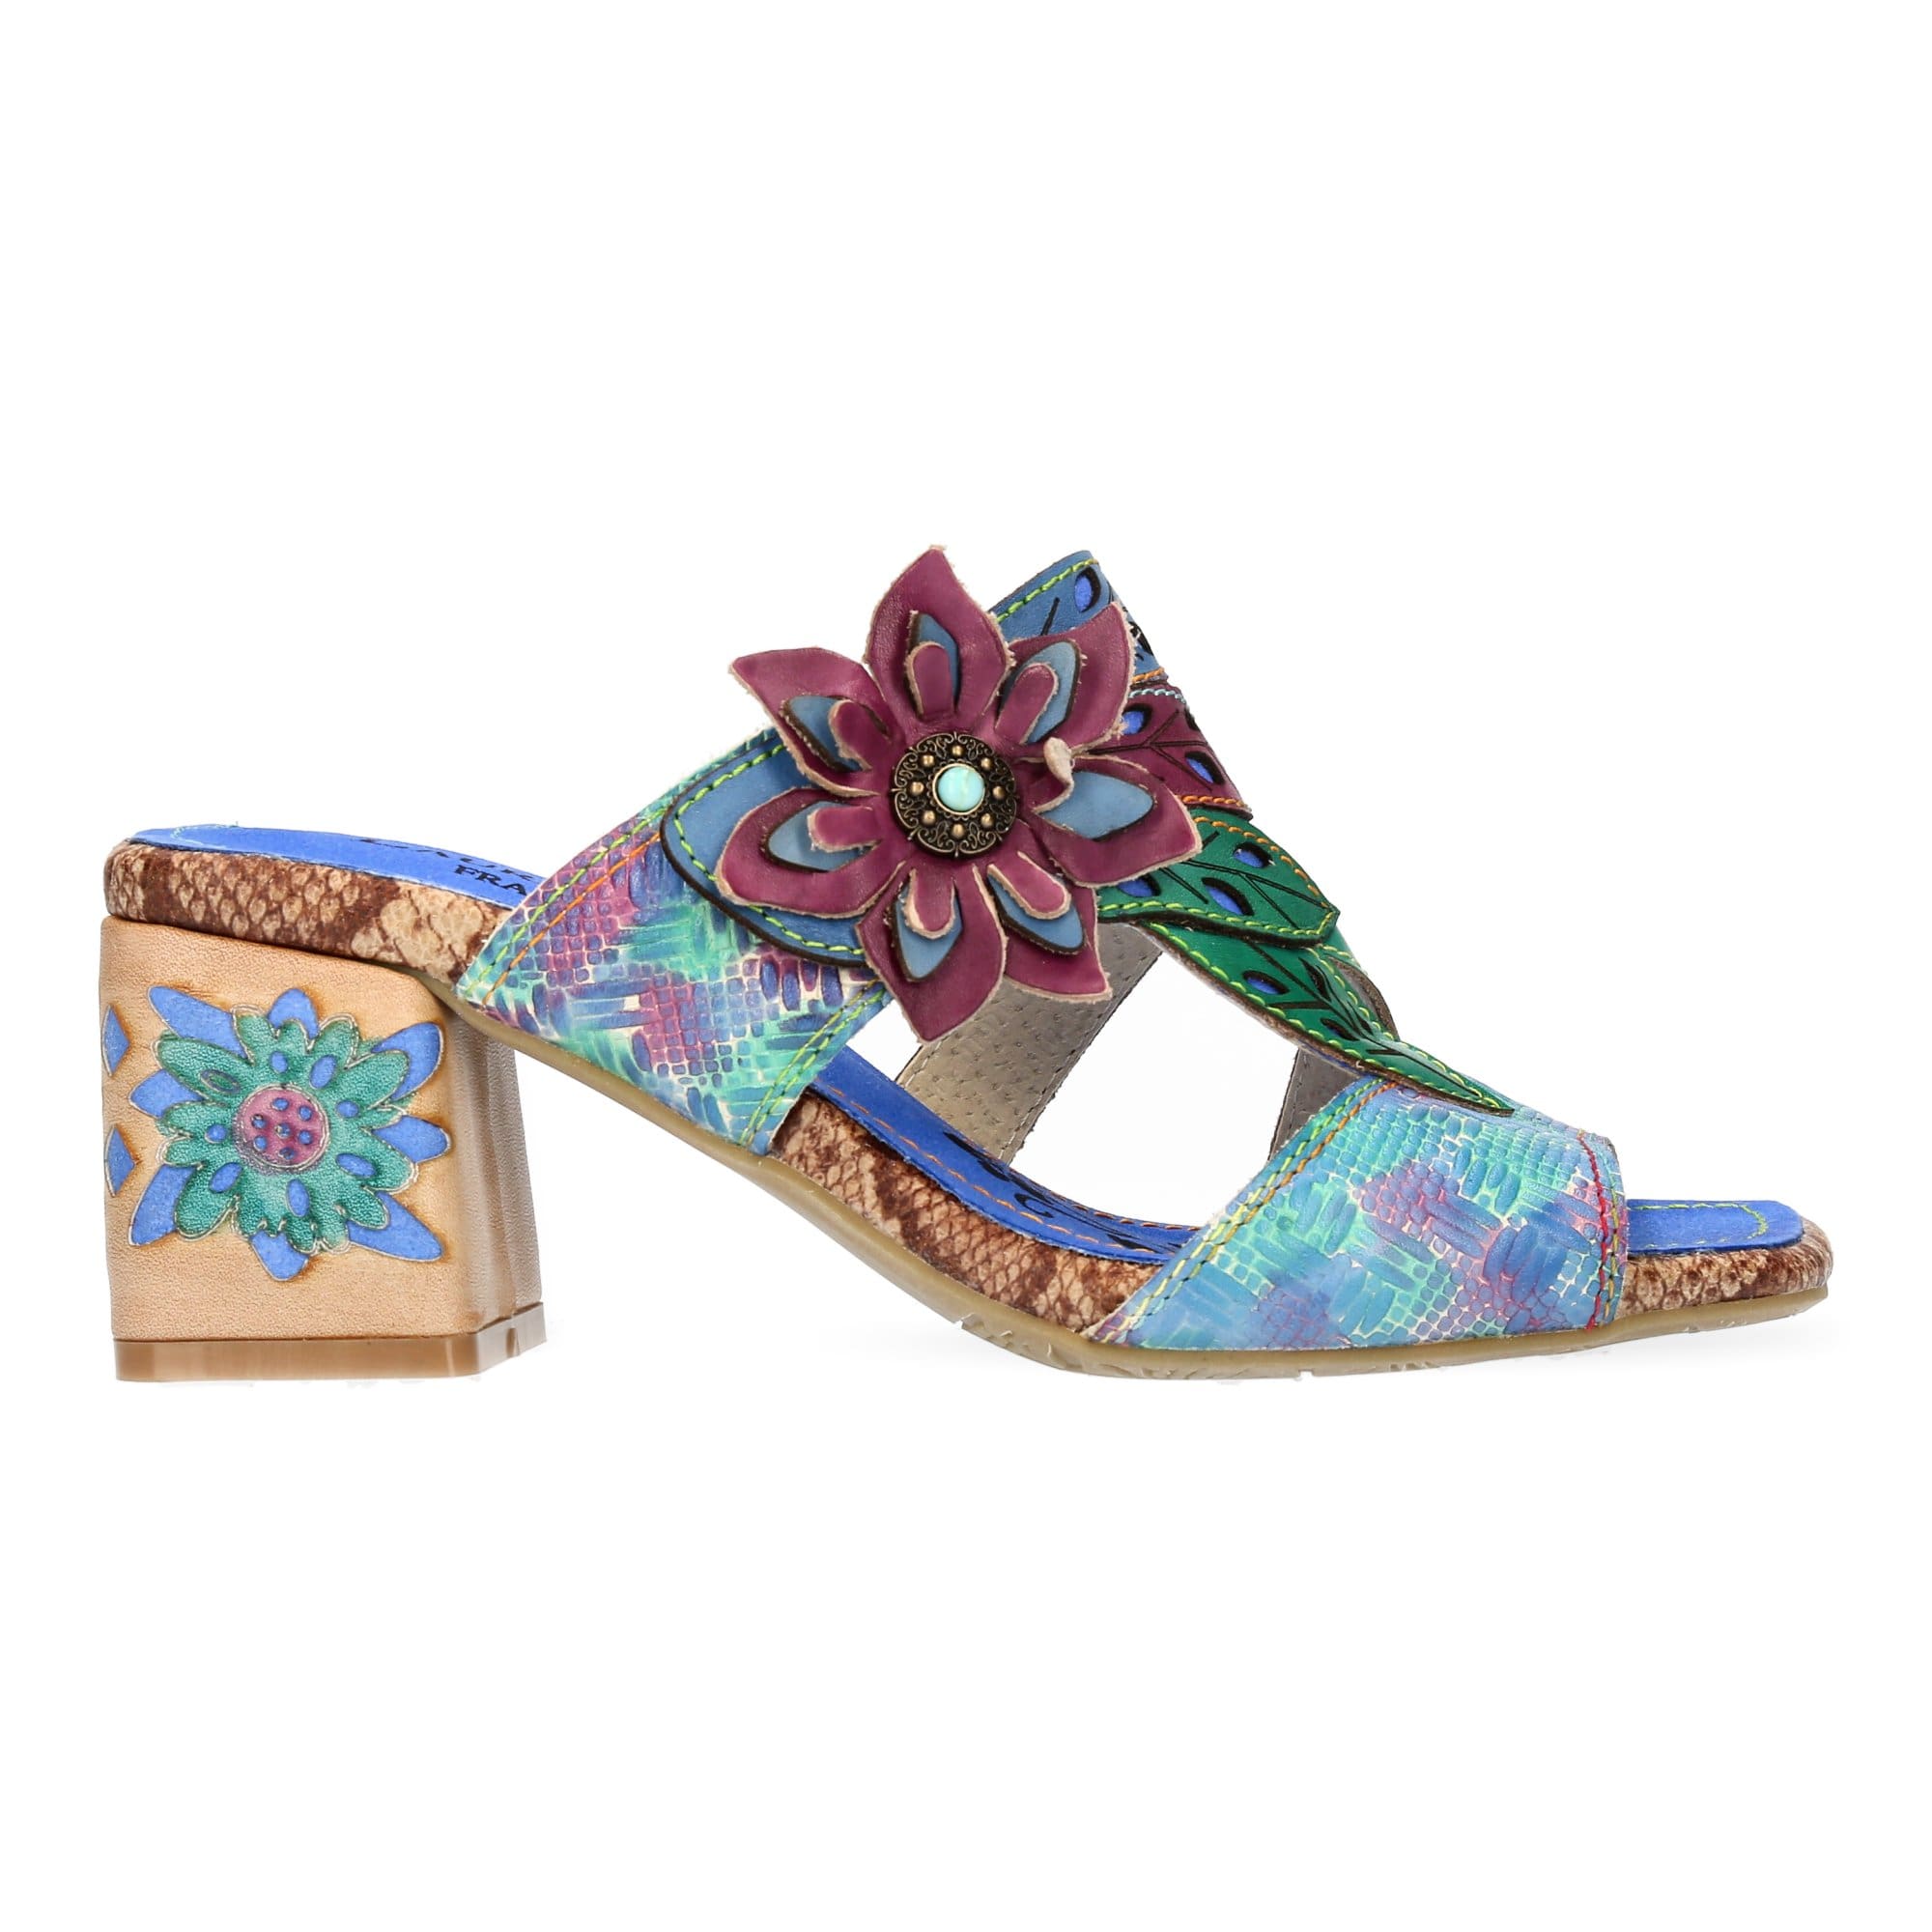 JACQUESO 02 skor - 35 / Turquoise - Mule